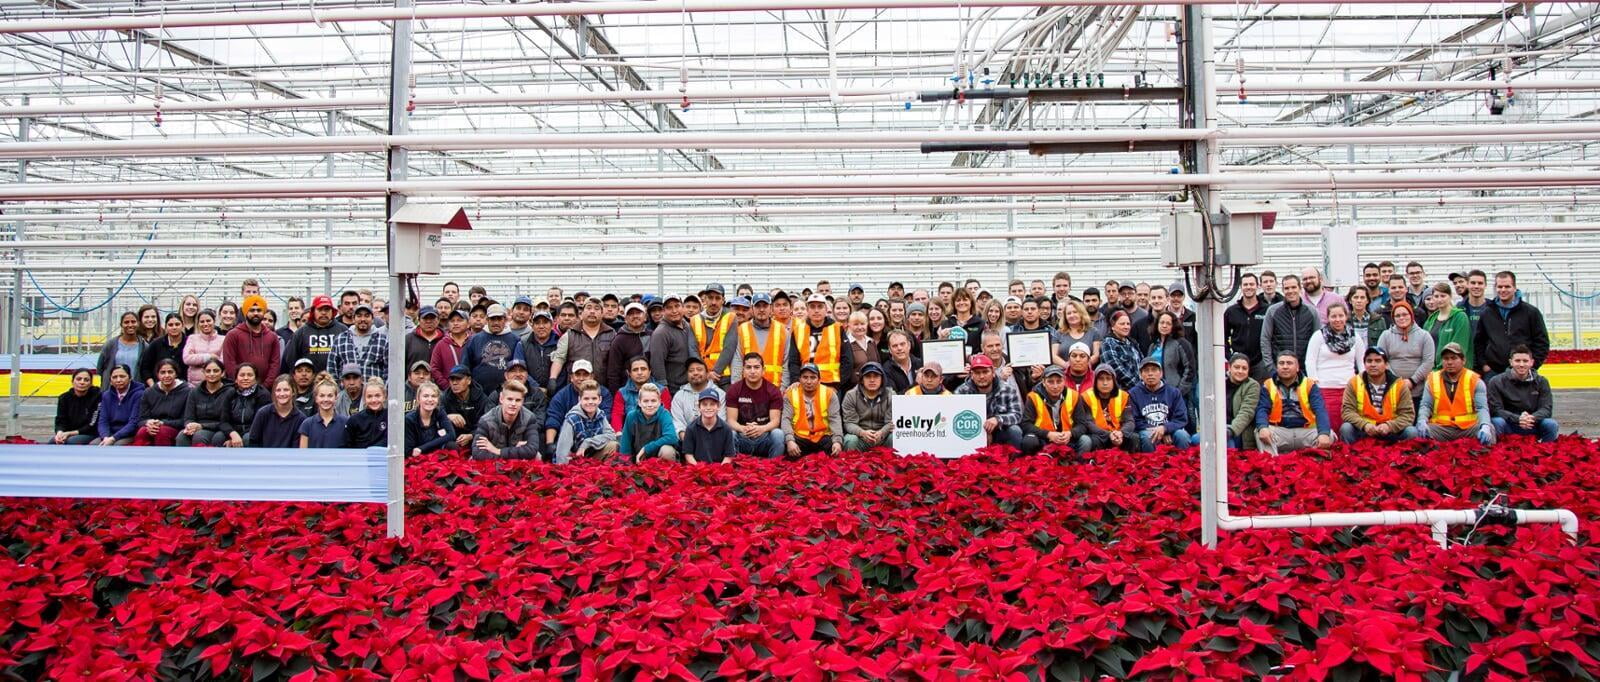 A huge group of Devry employees smiling for a photo in the middle of a greenhouse with red poinsettias in the foreground.